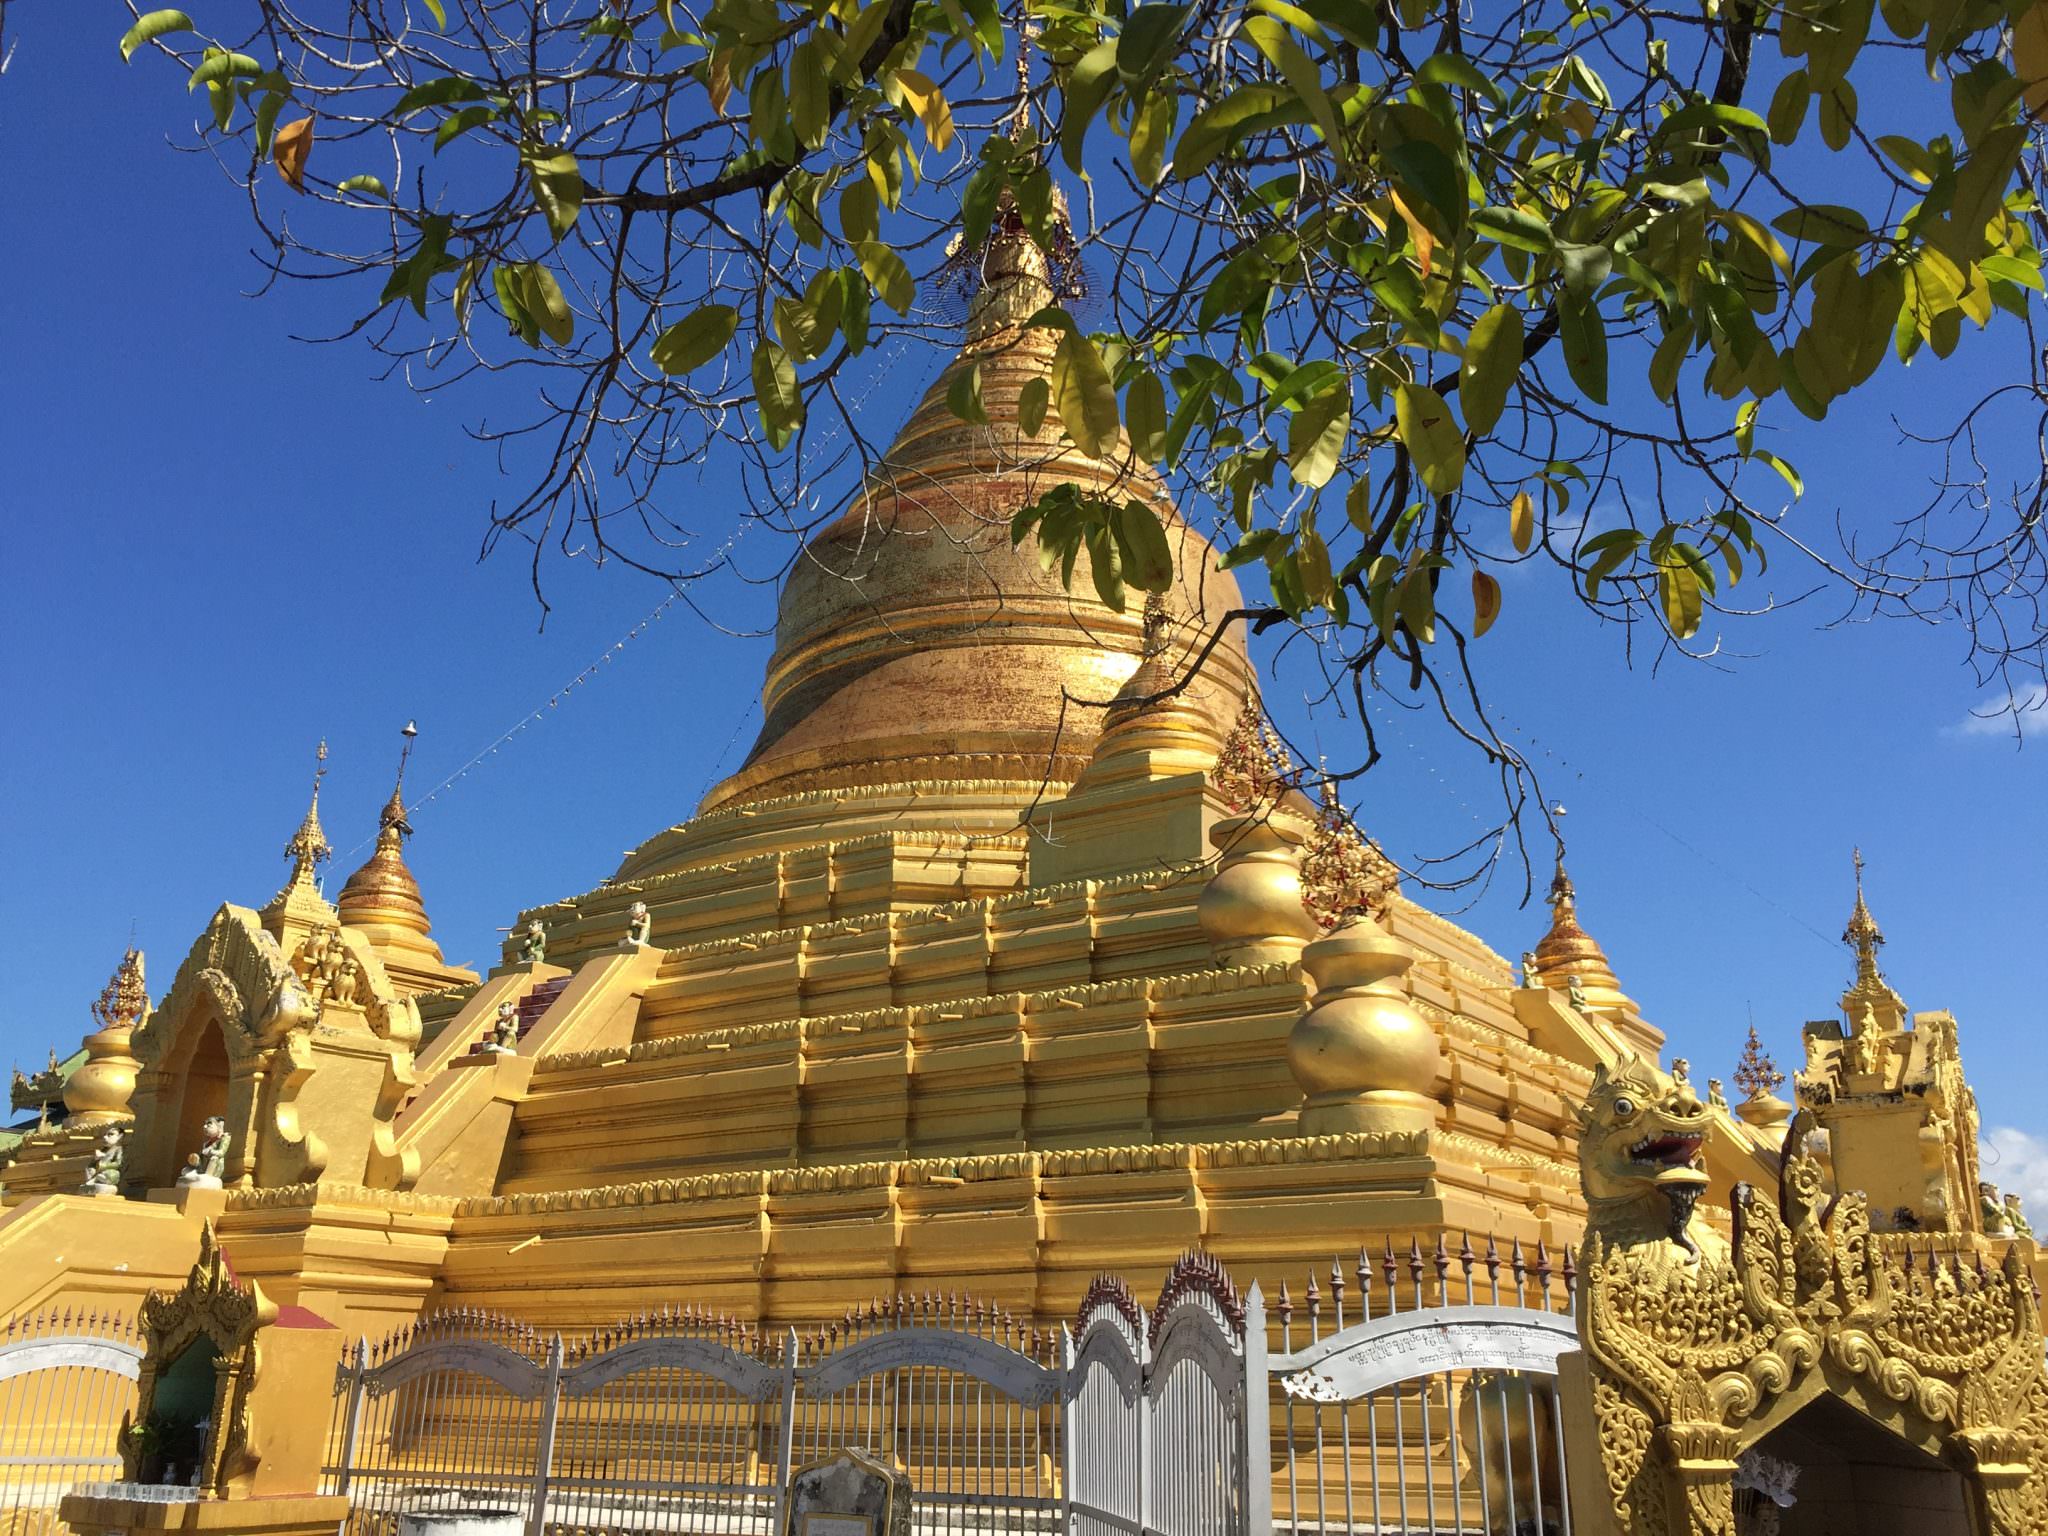 The central and primary stupa in the pagoda complex, Kuthodaw. © 2015 Gail Jessen